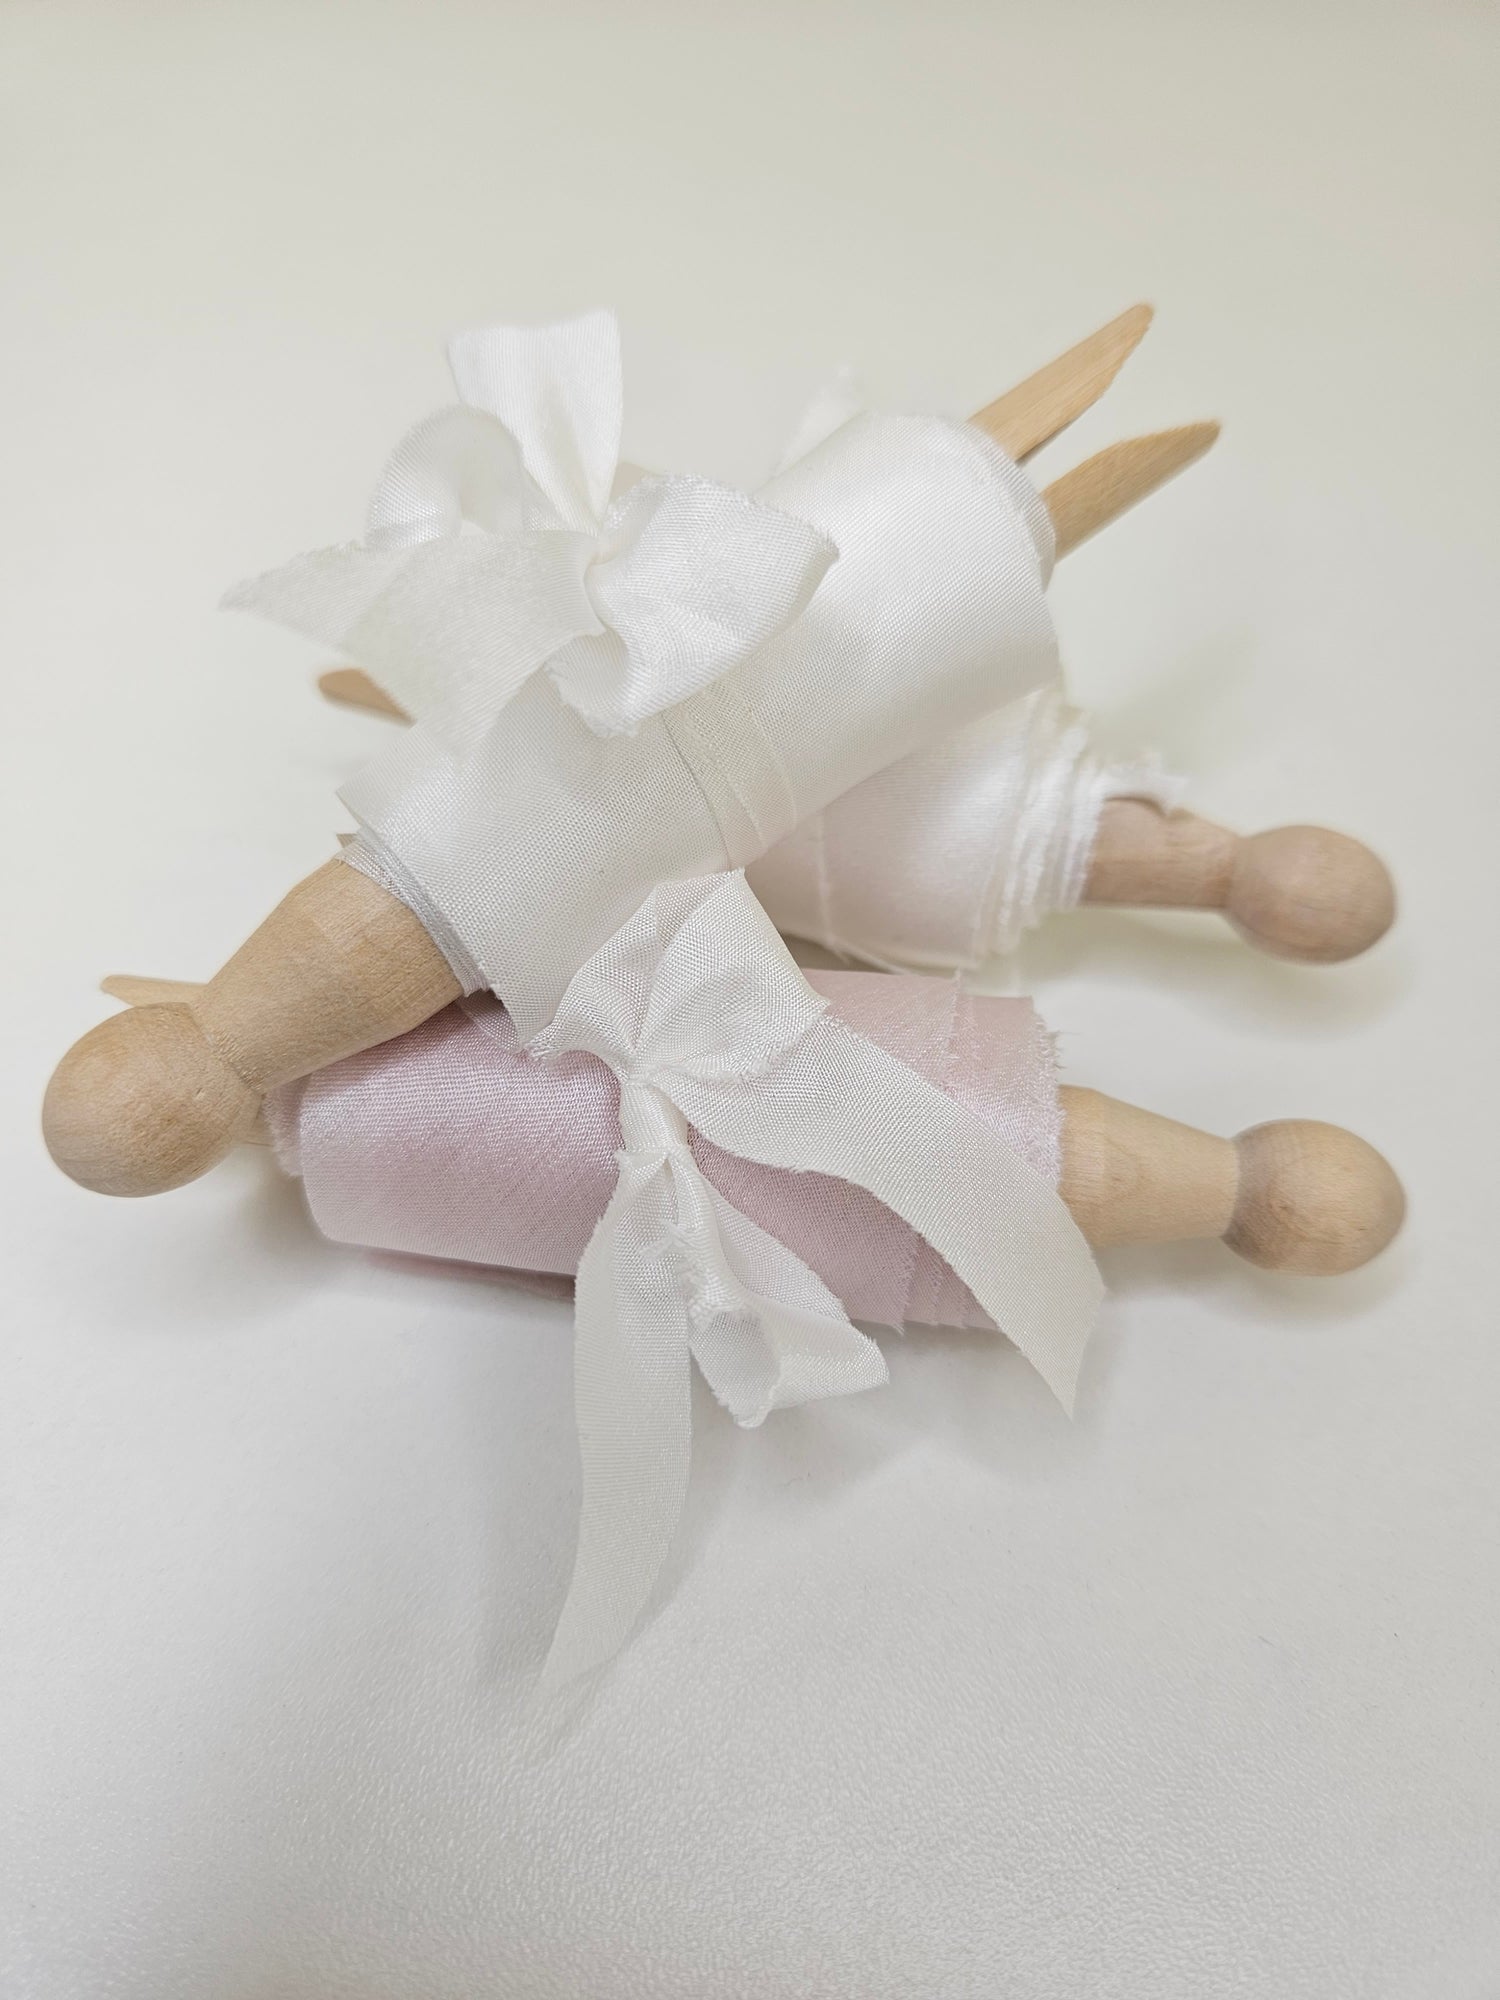 Silk Ribbon in Soft White and Soft Pink - an optional add-on to the Bridal Bloom Box.